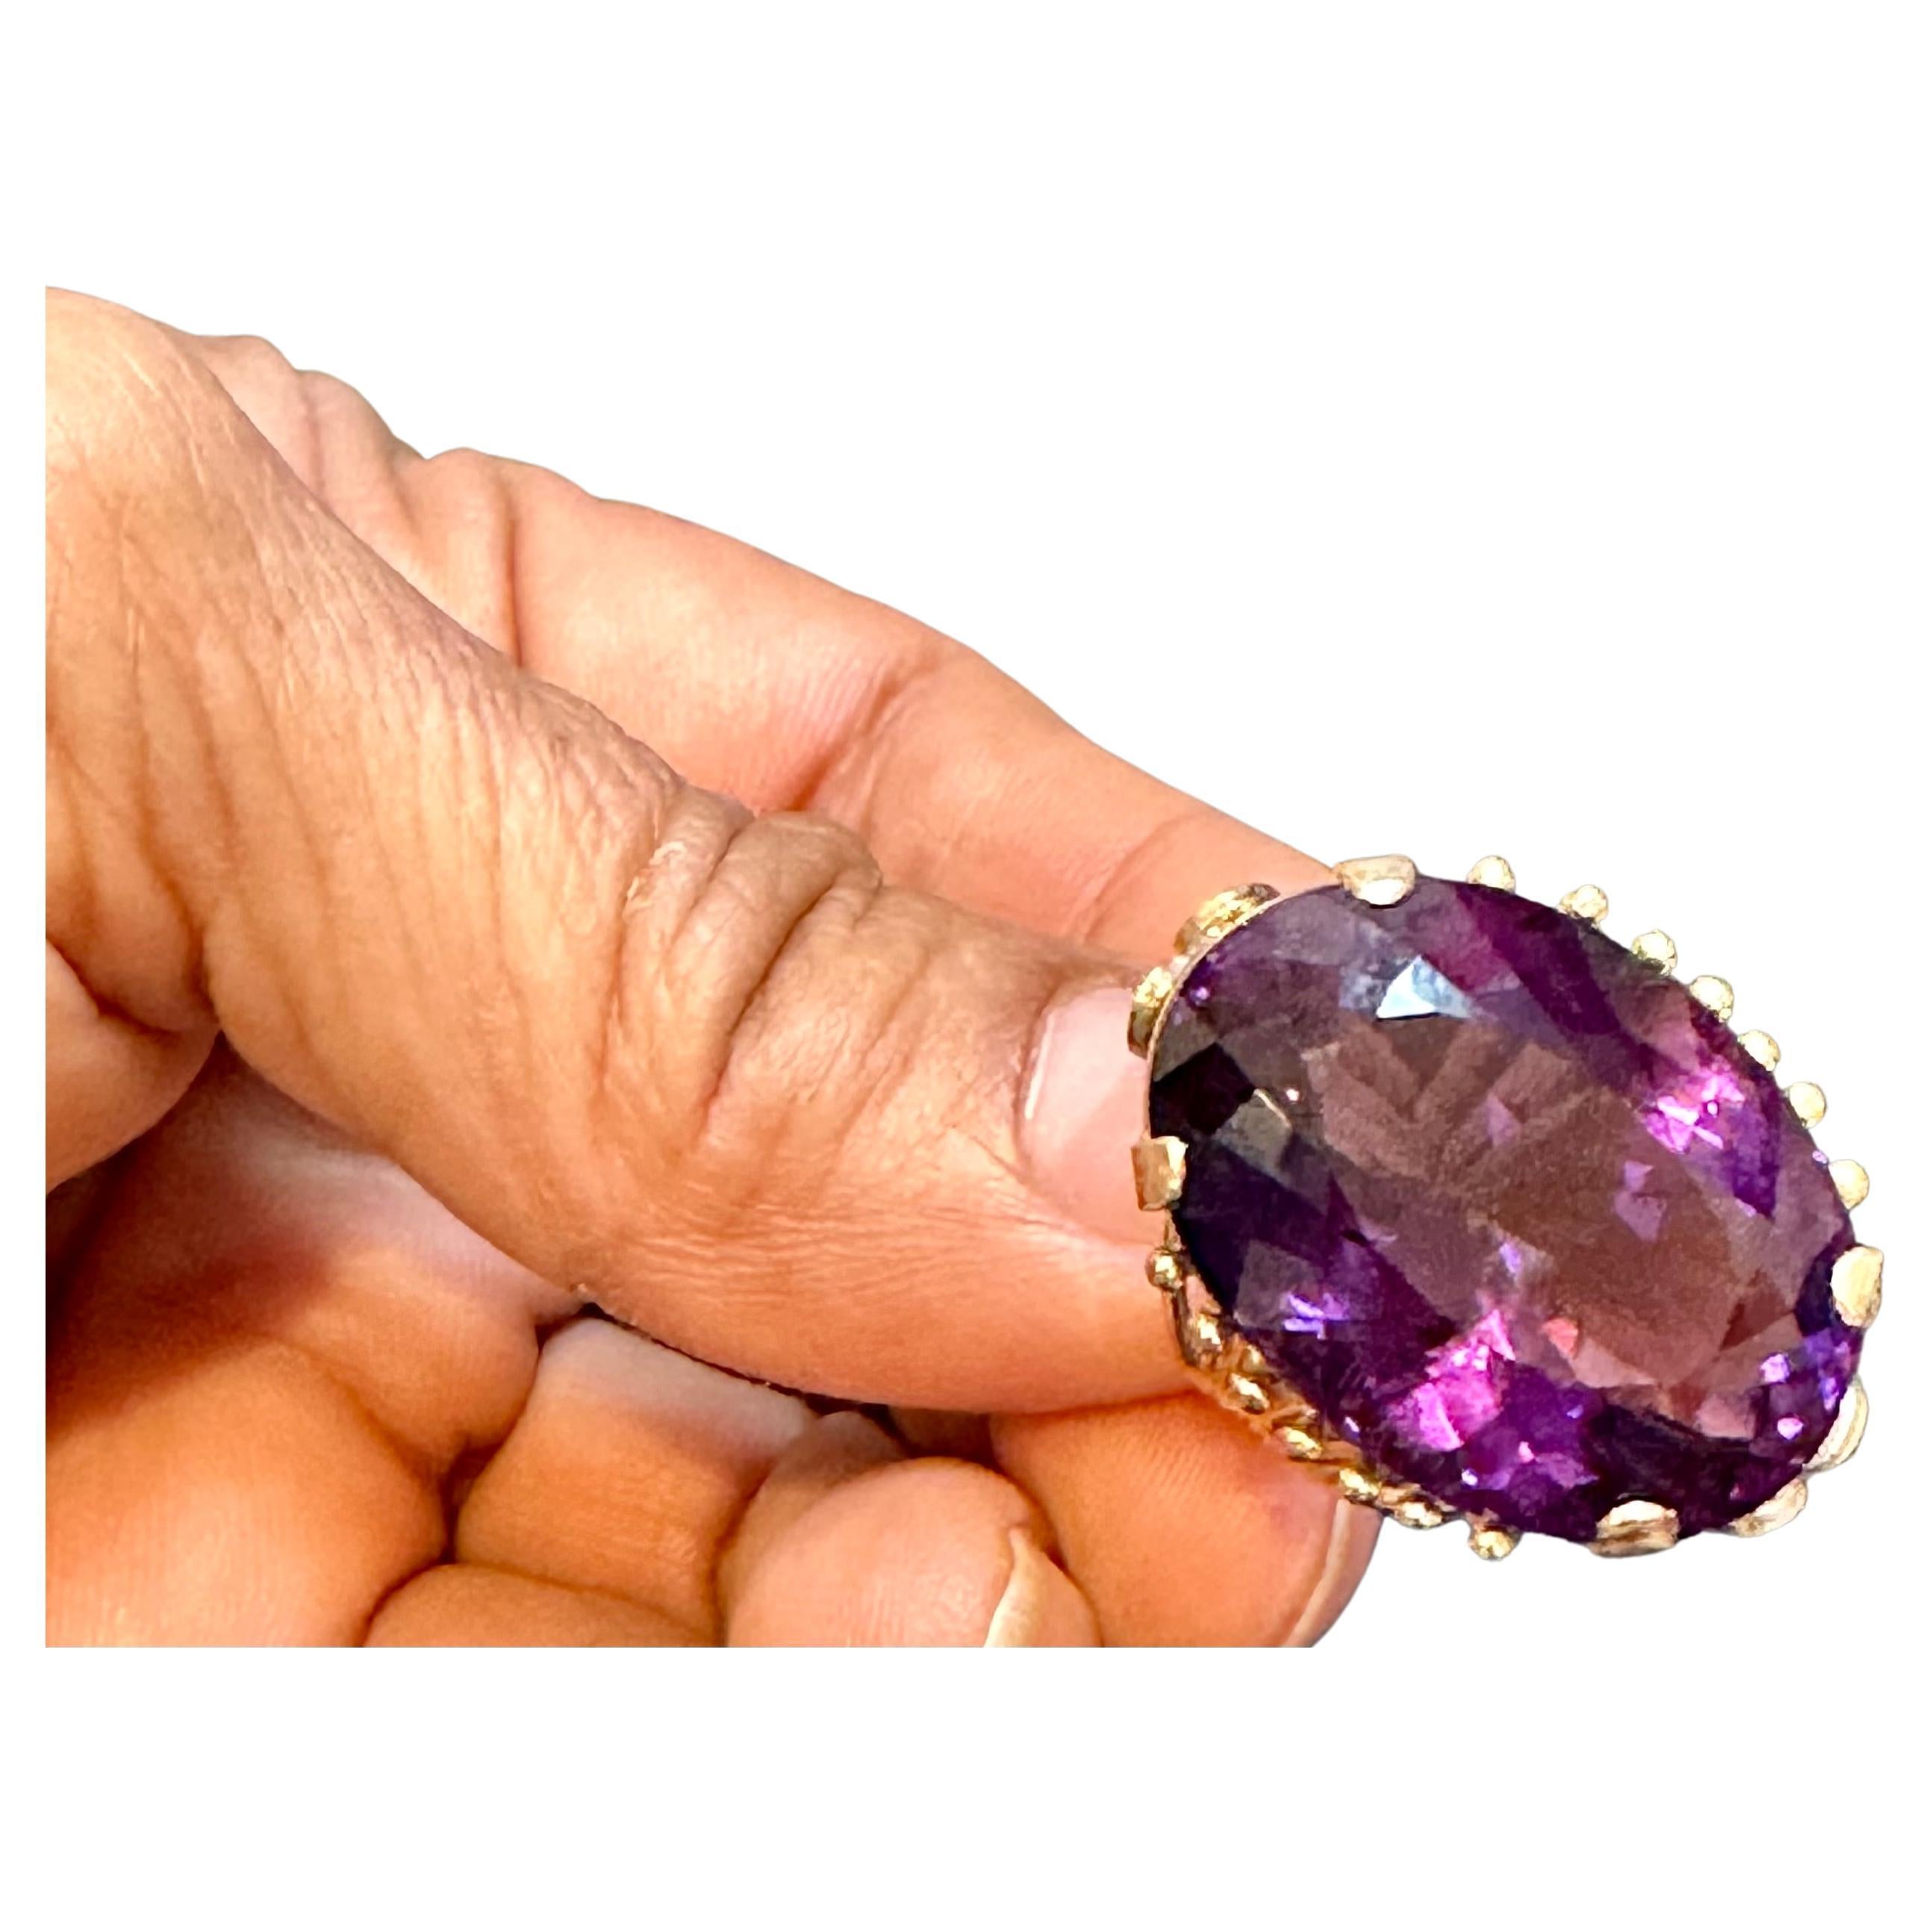 Approximately 27 Carat Beautiful  Amethyst Cocktail Ring in 14 Karat Yellow Gold Size 5.5
This is a Beautiful Cocktail ring ring which has a large approximately 20 carat of high quality Amethyst . Color and clarity is extremely nice. Large Oval cut